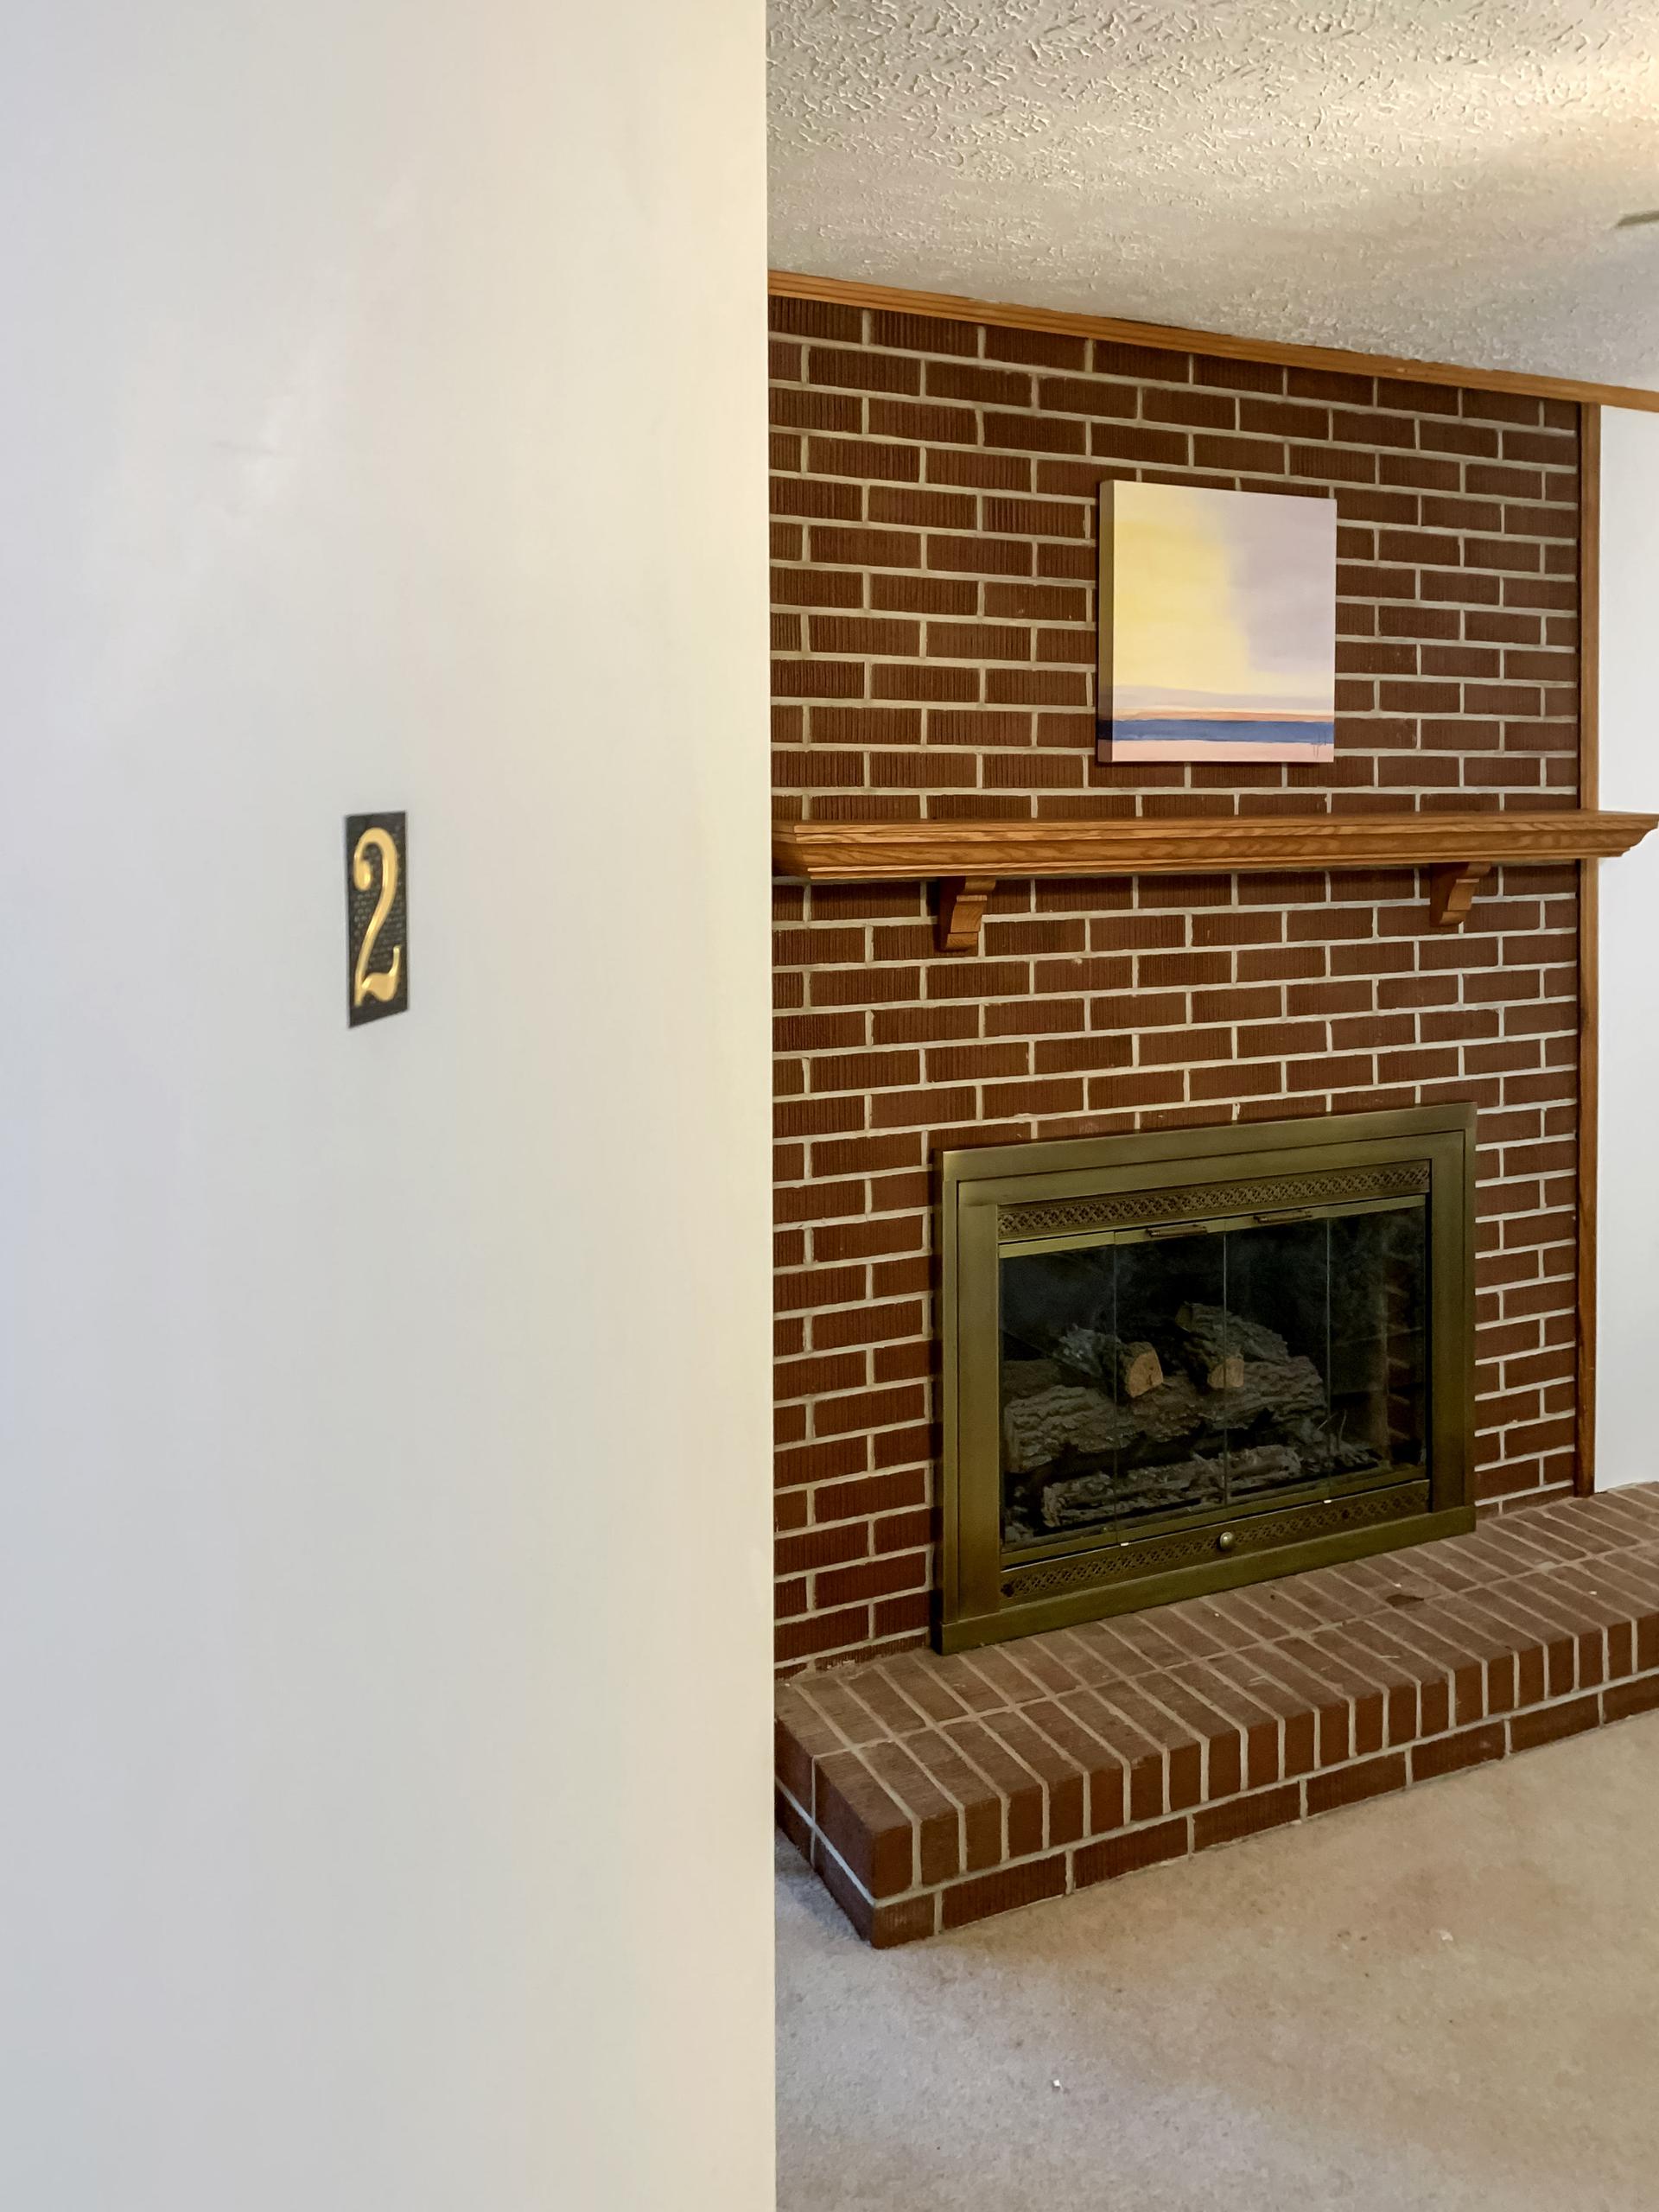 Room 2 has a decorative fireplace